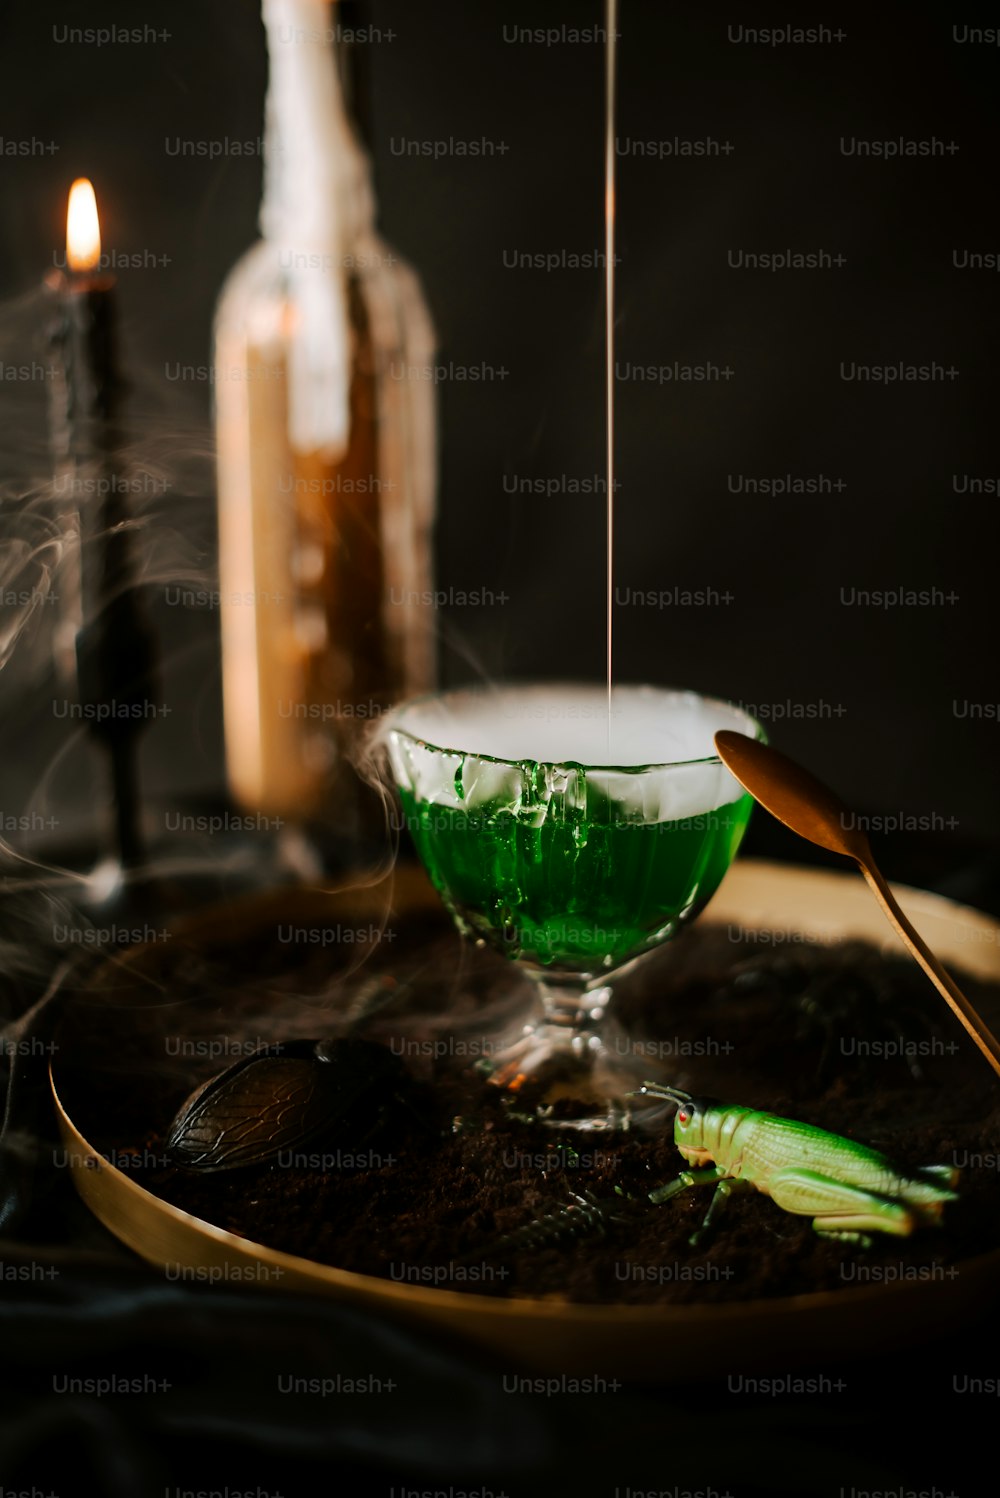 a green liquid in a glass on a plate